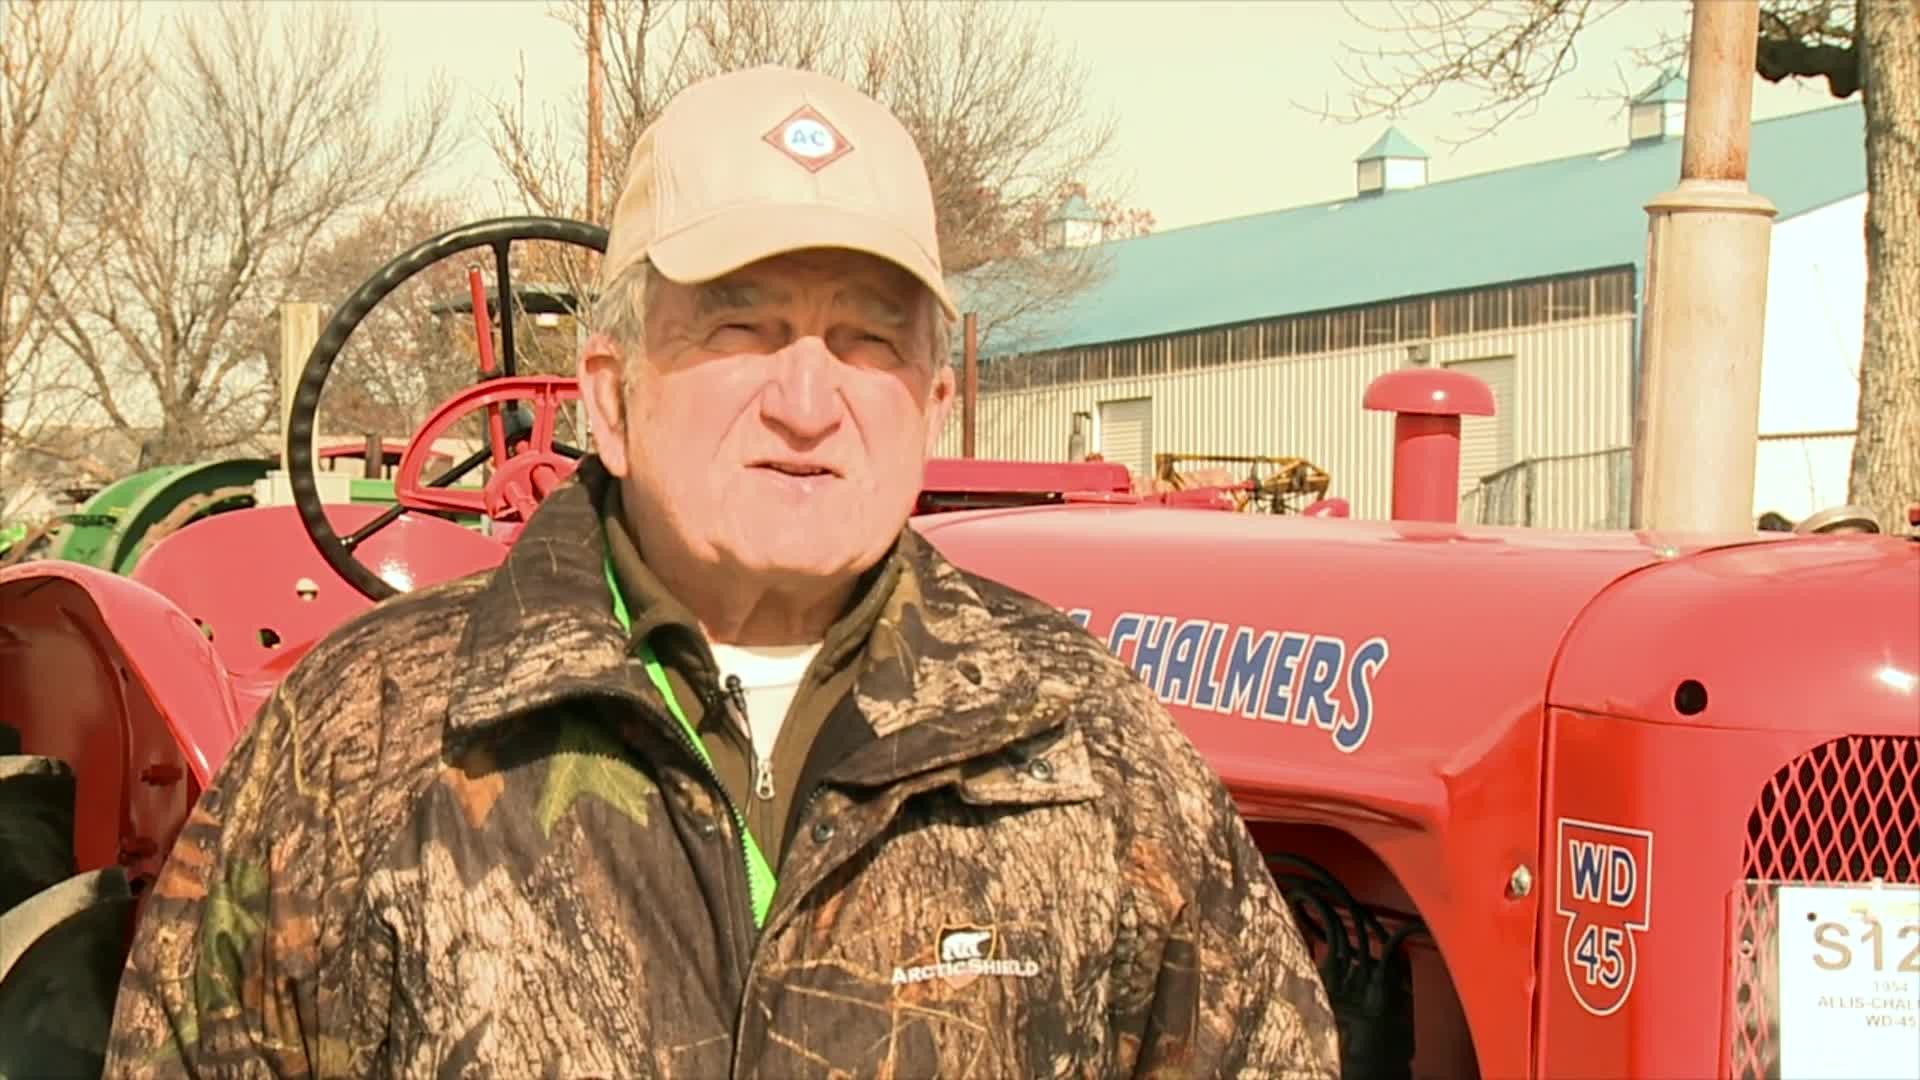 This man's tractor is going to help with Alzheimer's research